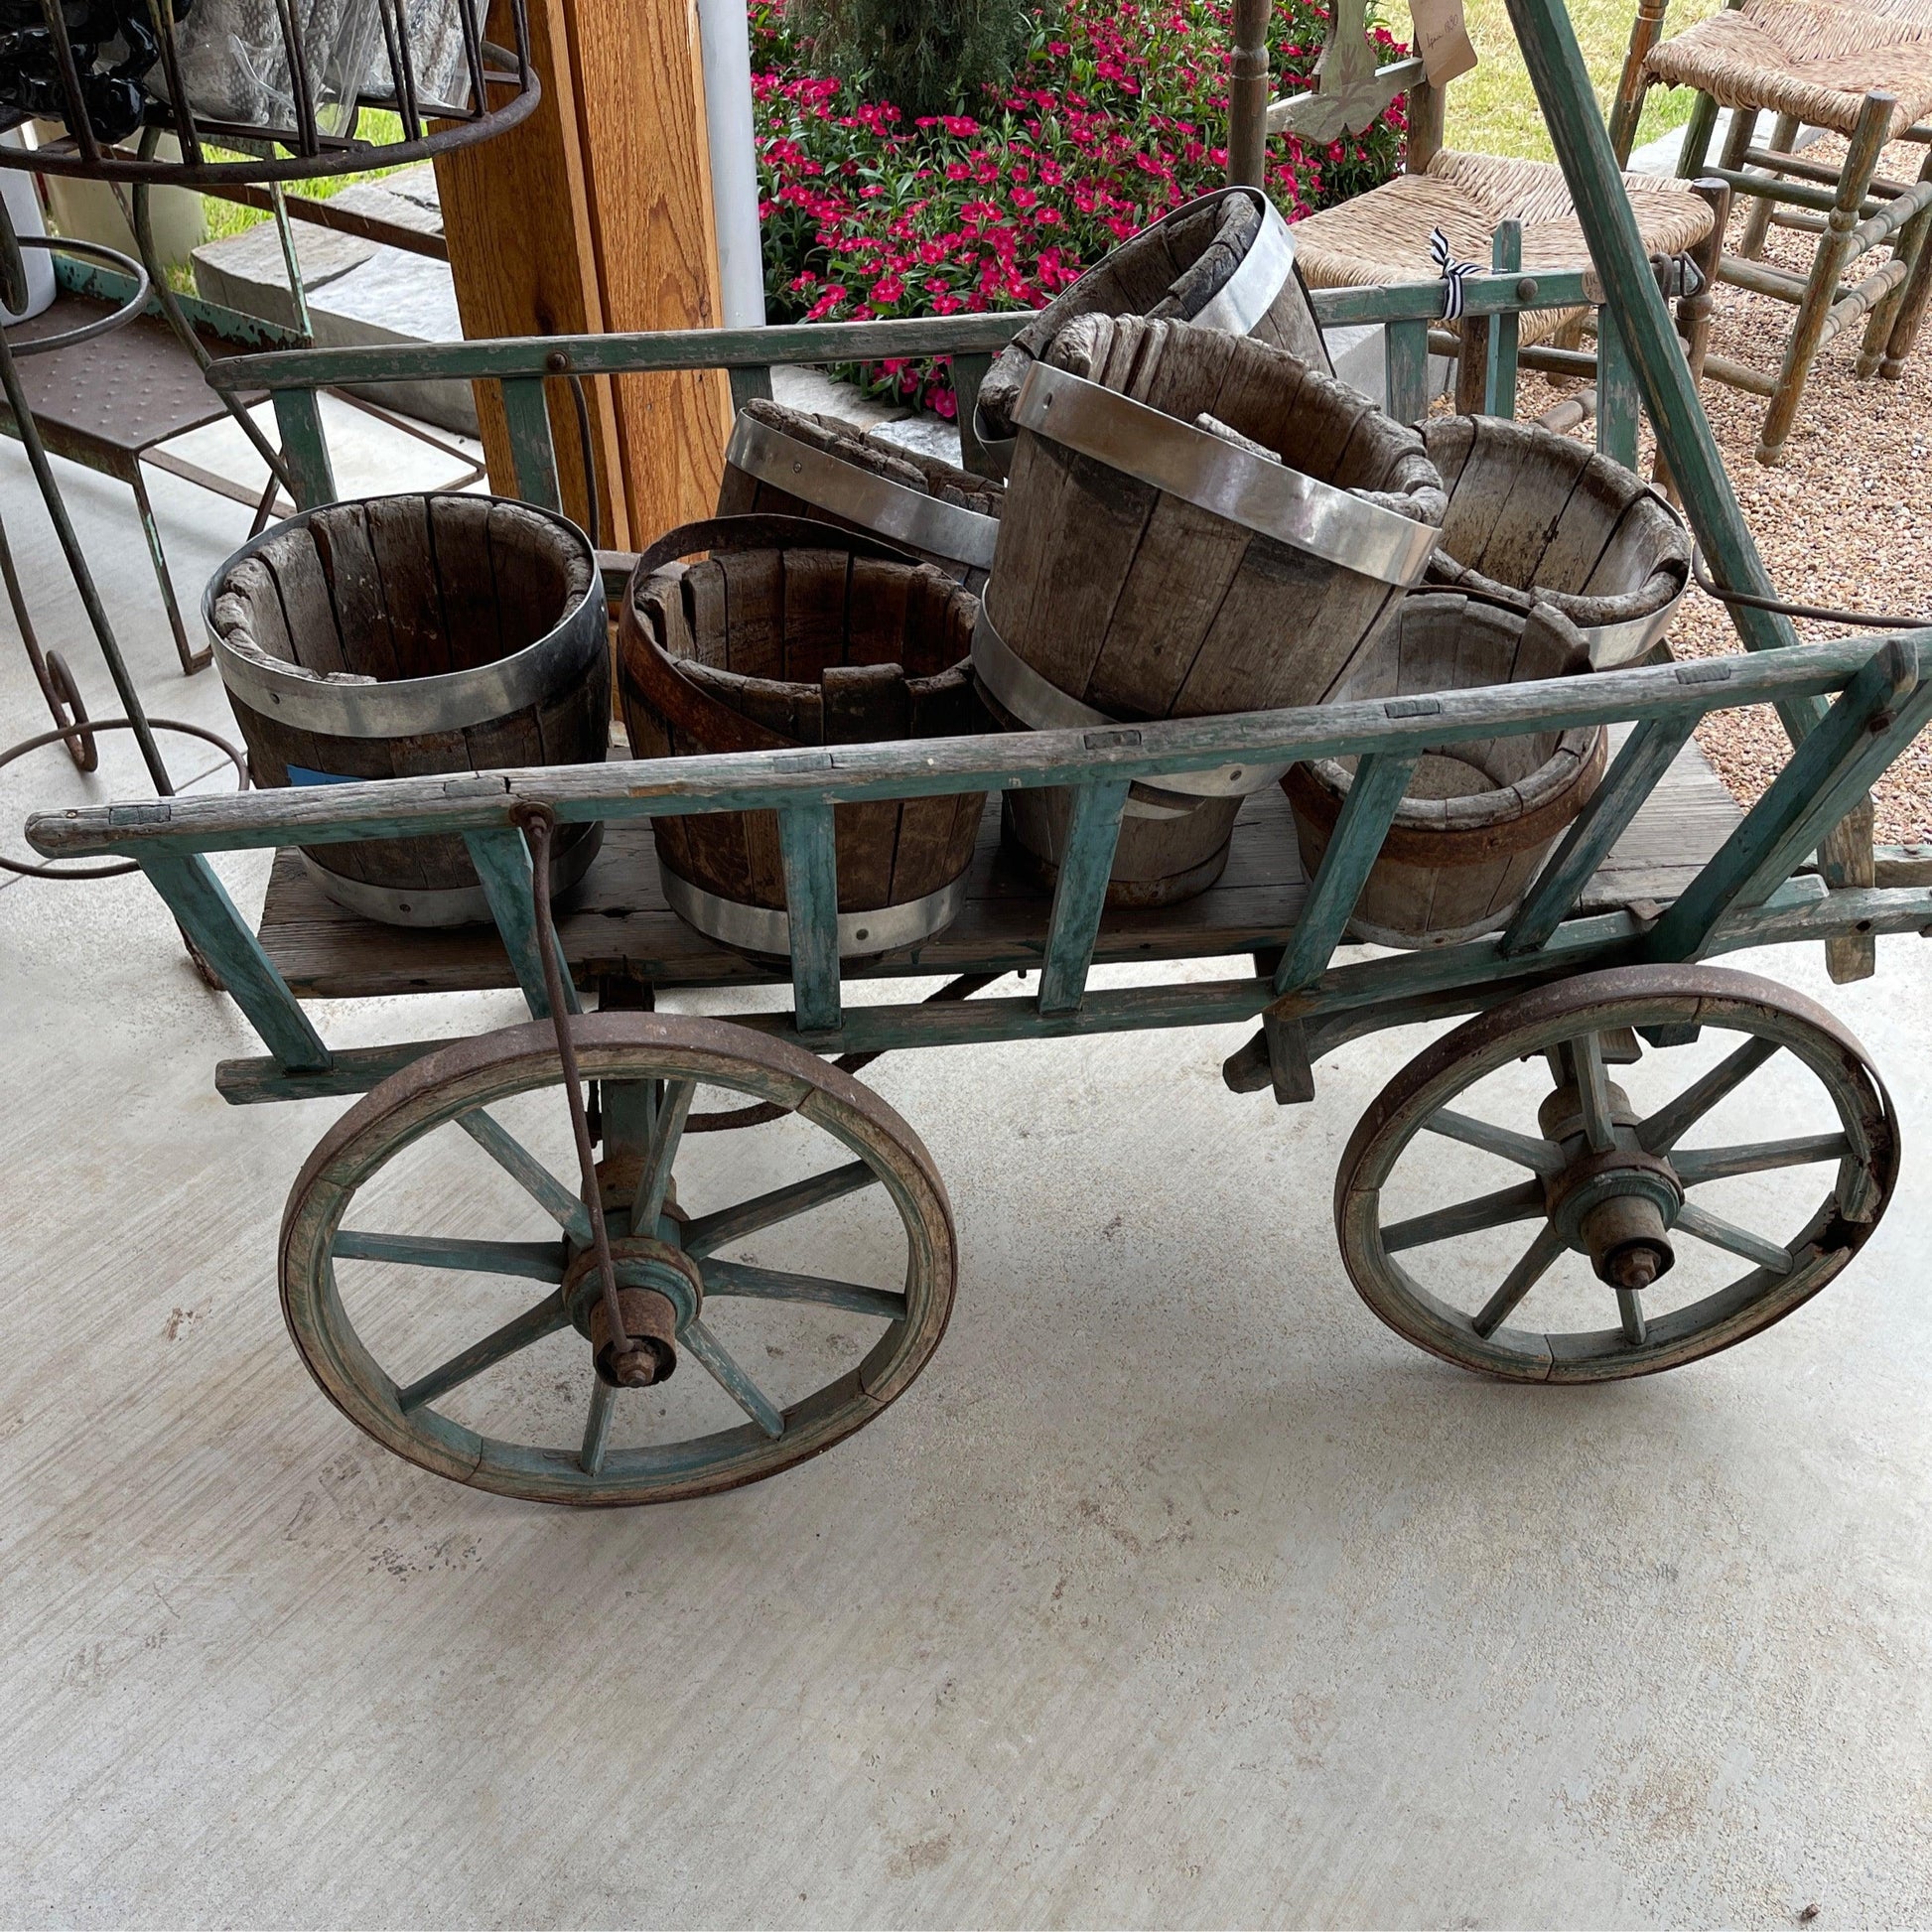 Antique Green Wooden Goat Cart - The White Barn Antiques